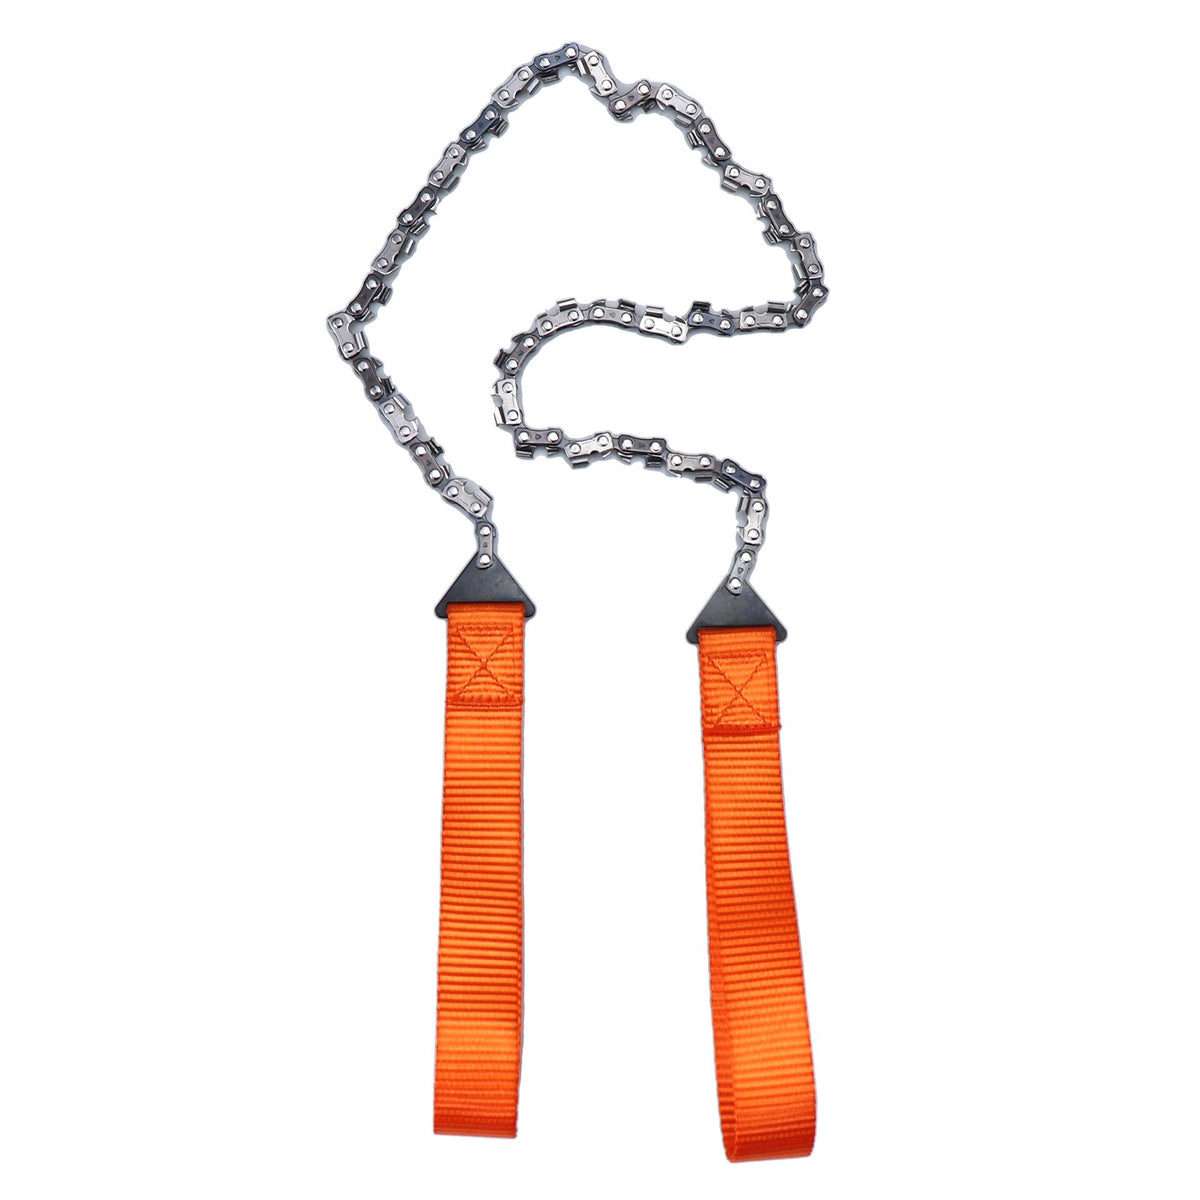 Outdoor pocket chain saw Camping survival hand zipper saw